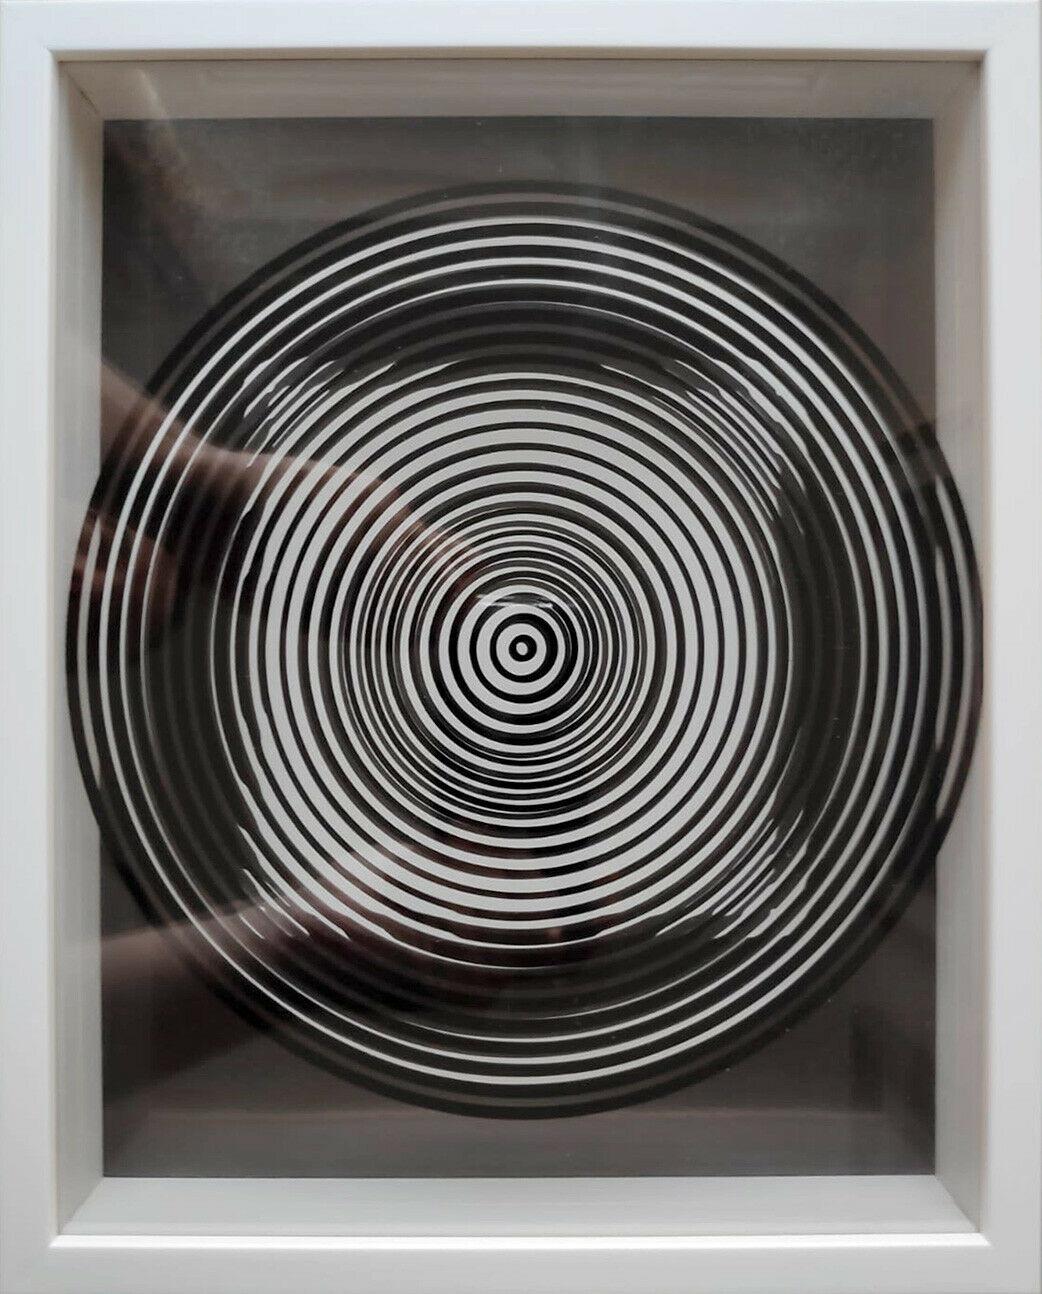 Victor Vasarely
Kinetics 4
double screen print on rhodoid and cardboard
editions of the griffon
neuchatel (switzerland)
1st edition . 1973
white wood frame
perfect condition
very nice kinetic effect by superimposing the 2 supports
Frame dimensions: